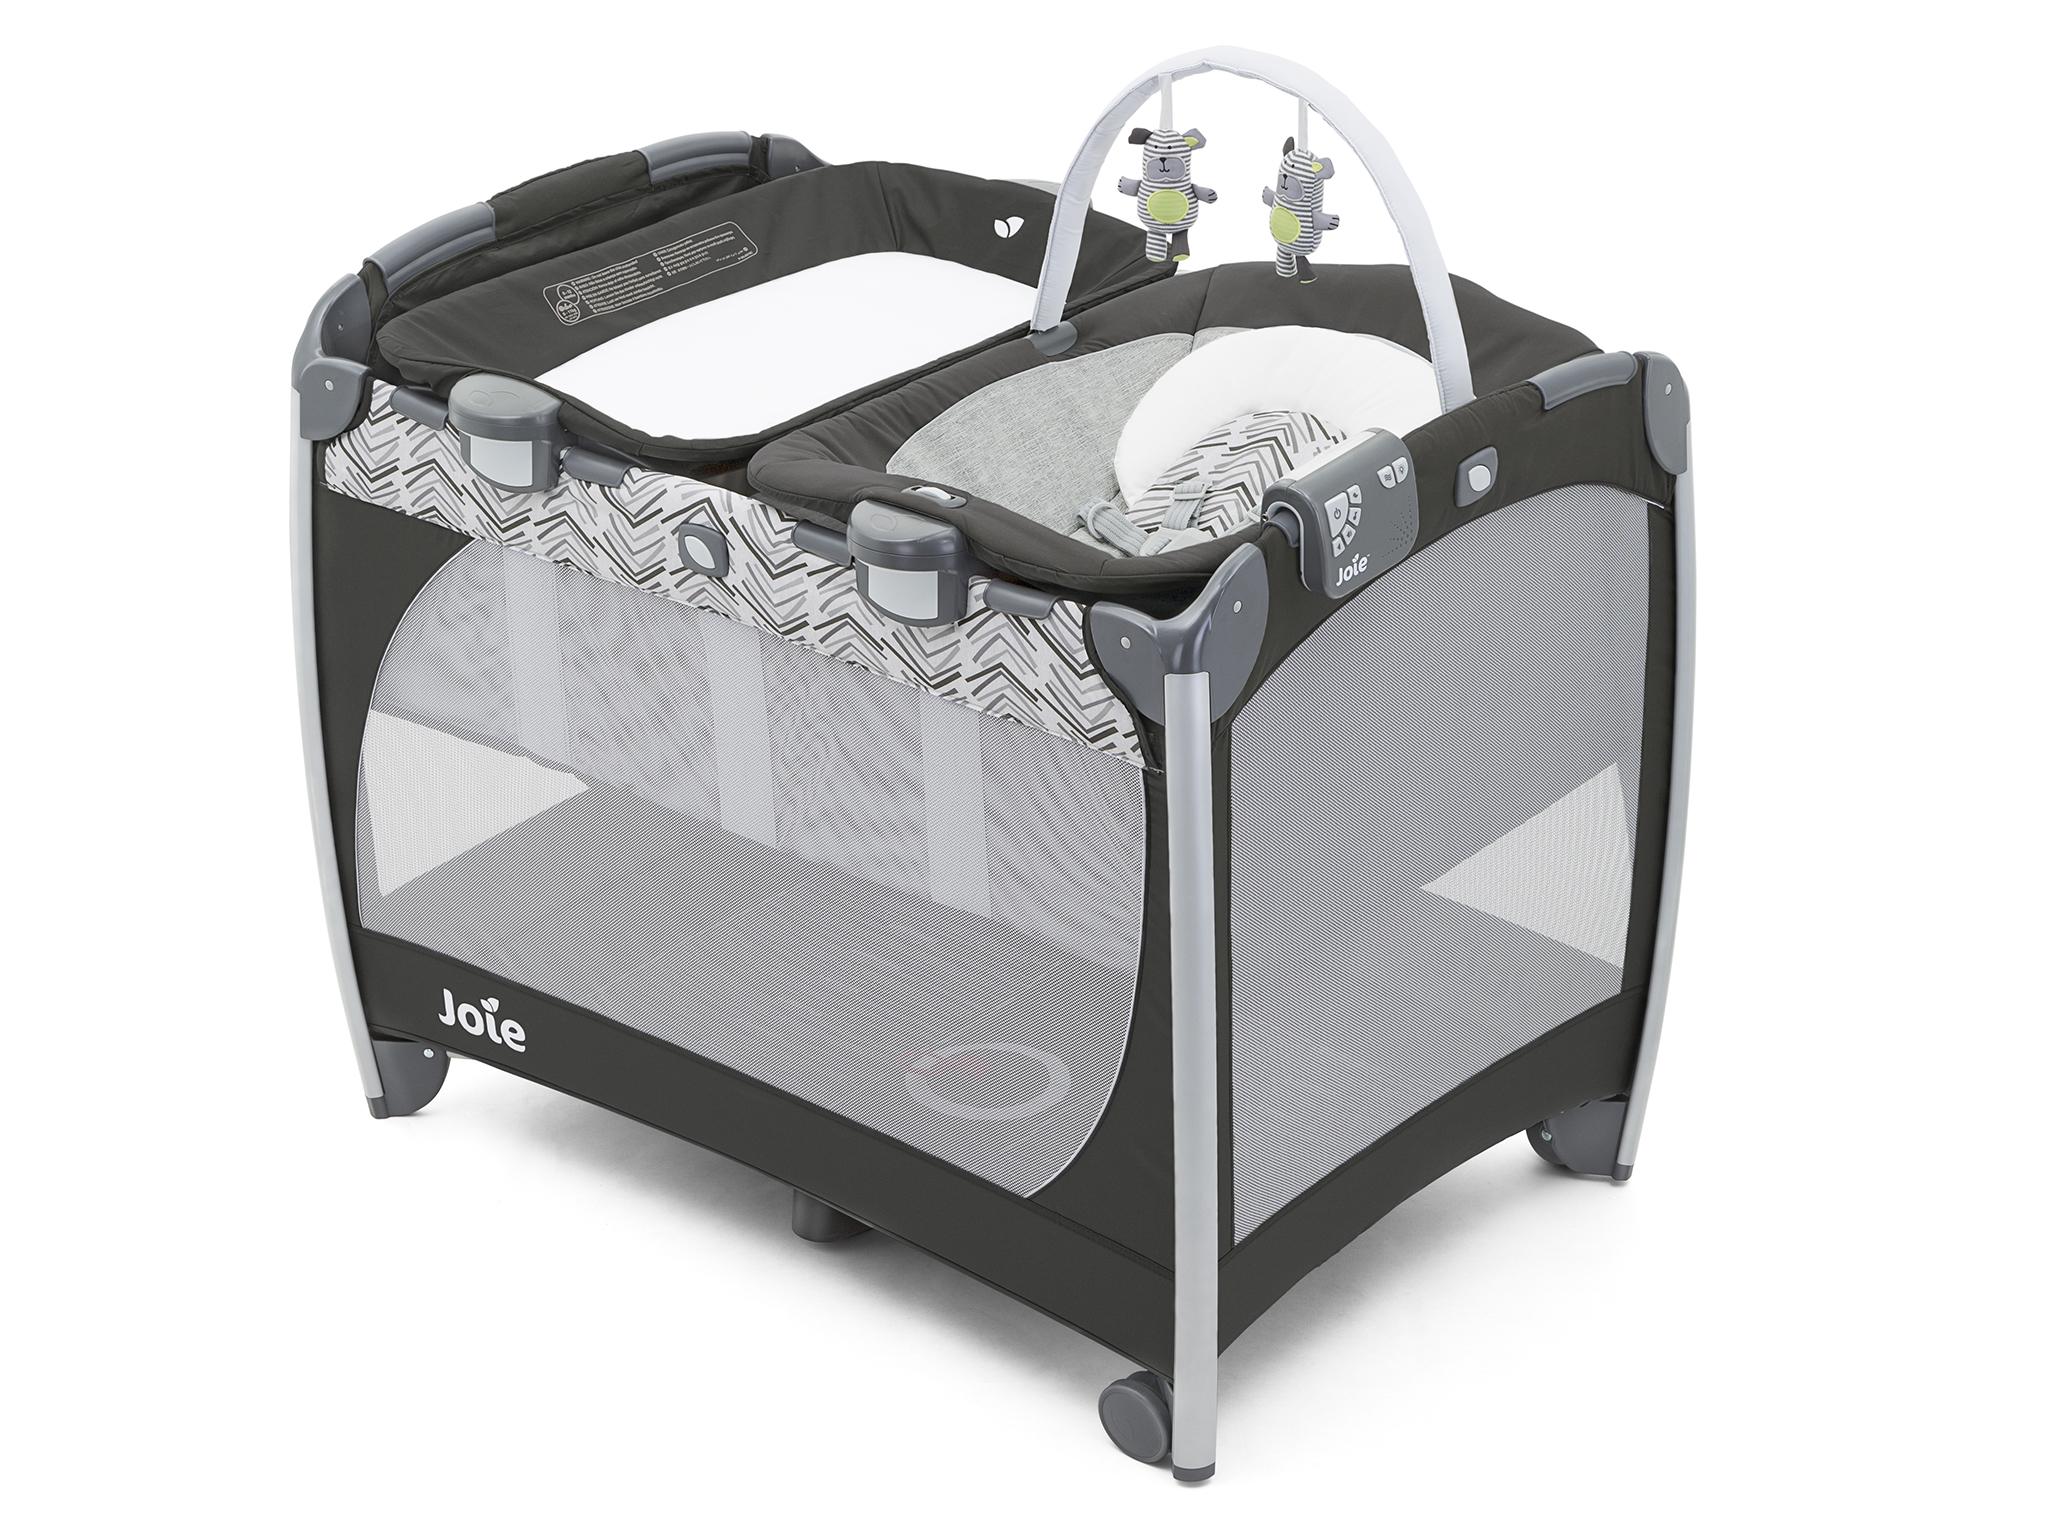 This is a lot more than just a travel cot: it includes a portable changing  unit that can be placed on top of the cot, a bouncy seat with a music (five